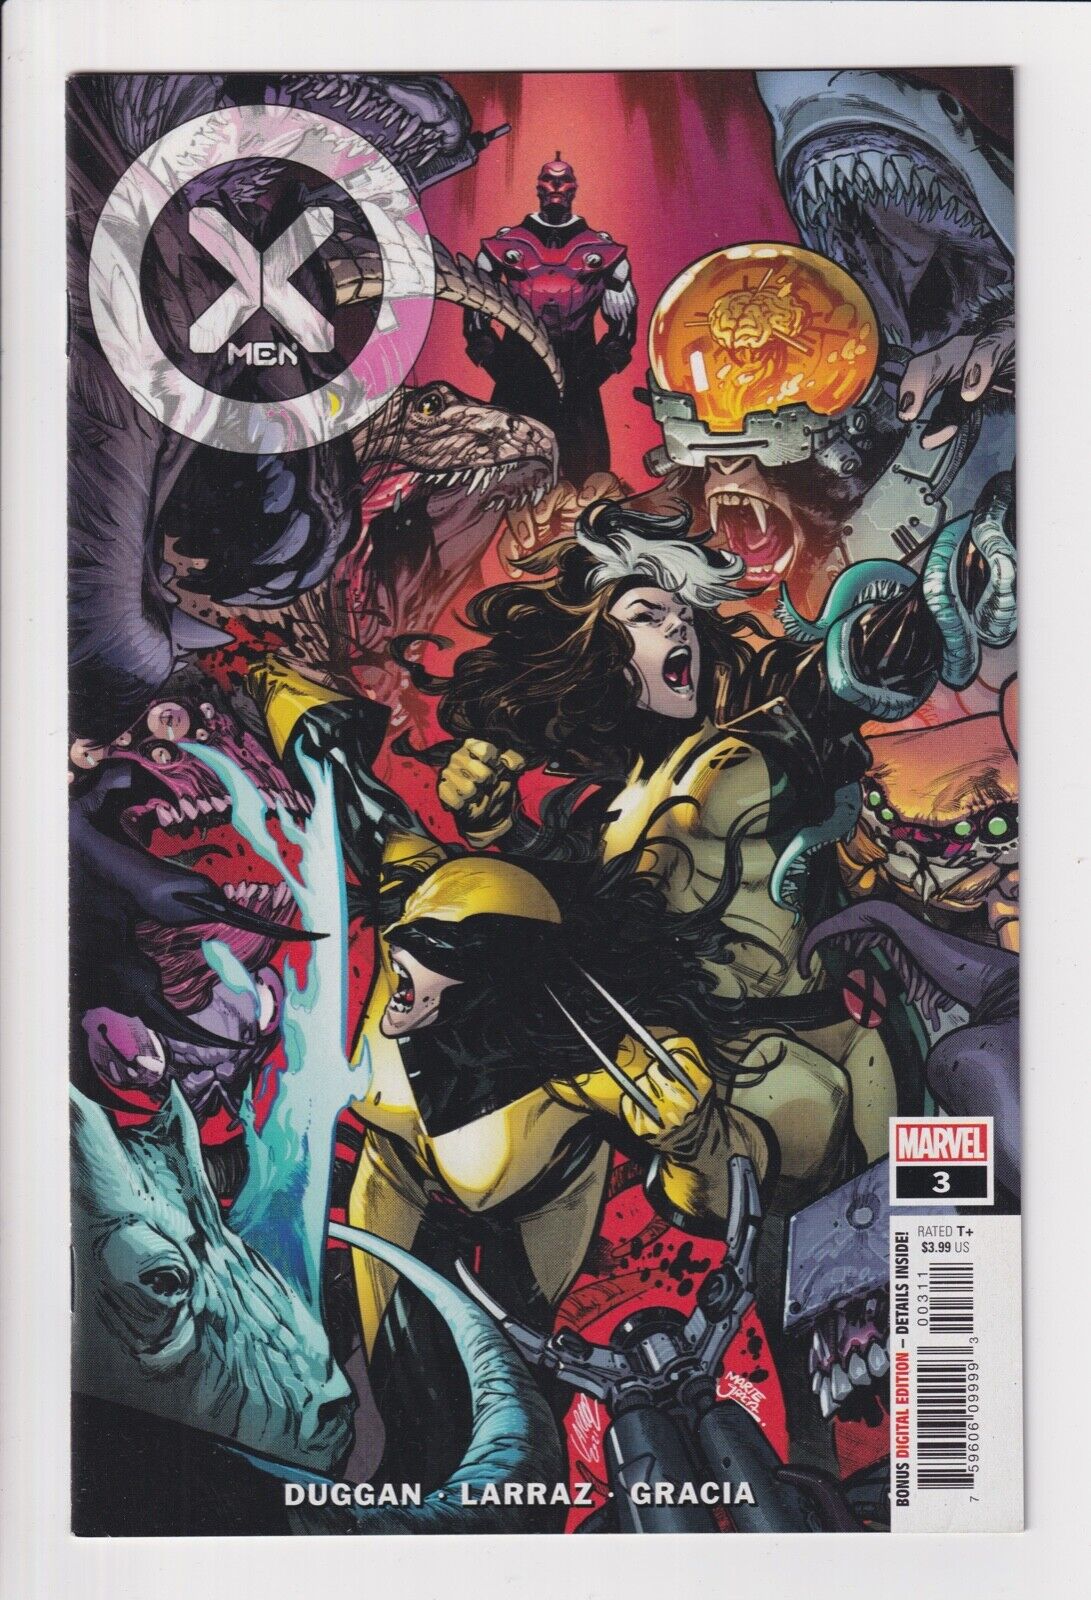 CLEARANCE BIN: X-MEN 1-22 VG Reign of X Marvel comics sold SEPARATELY you PICK